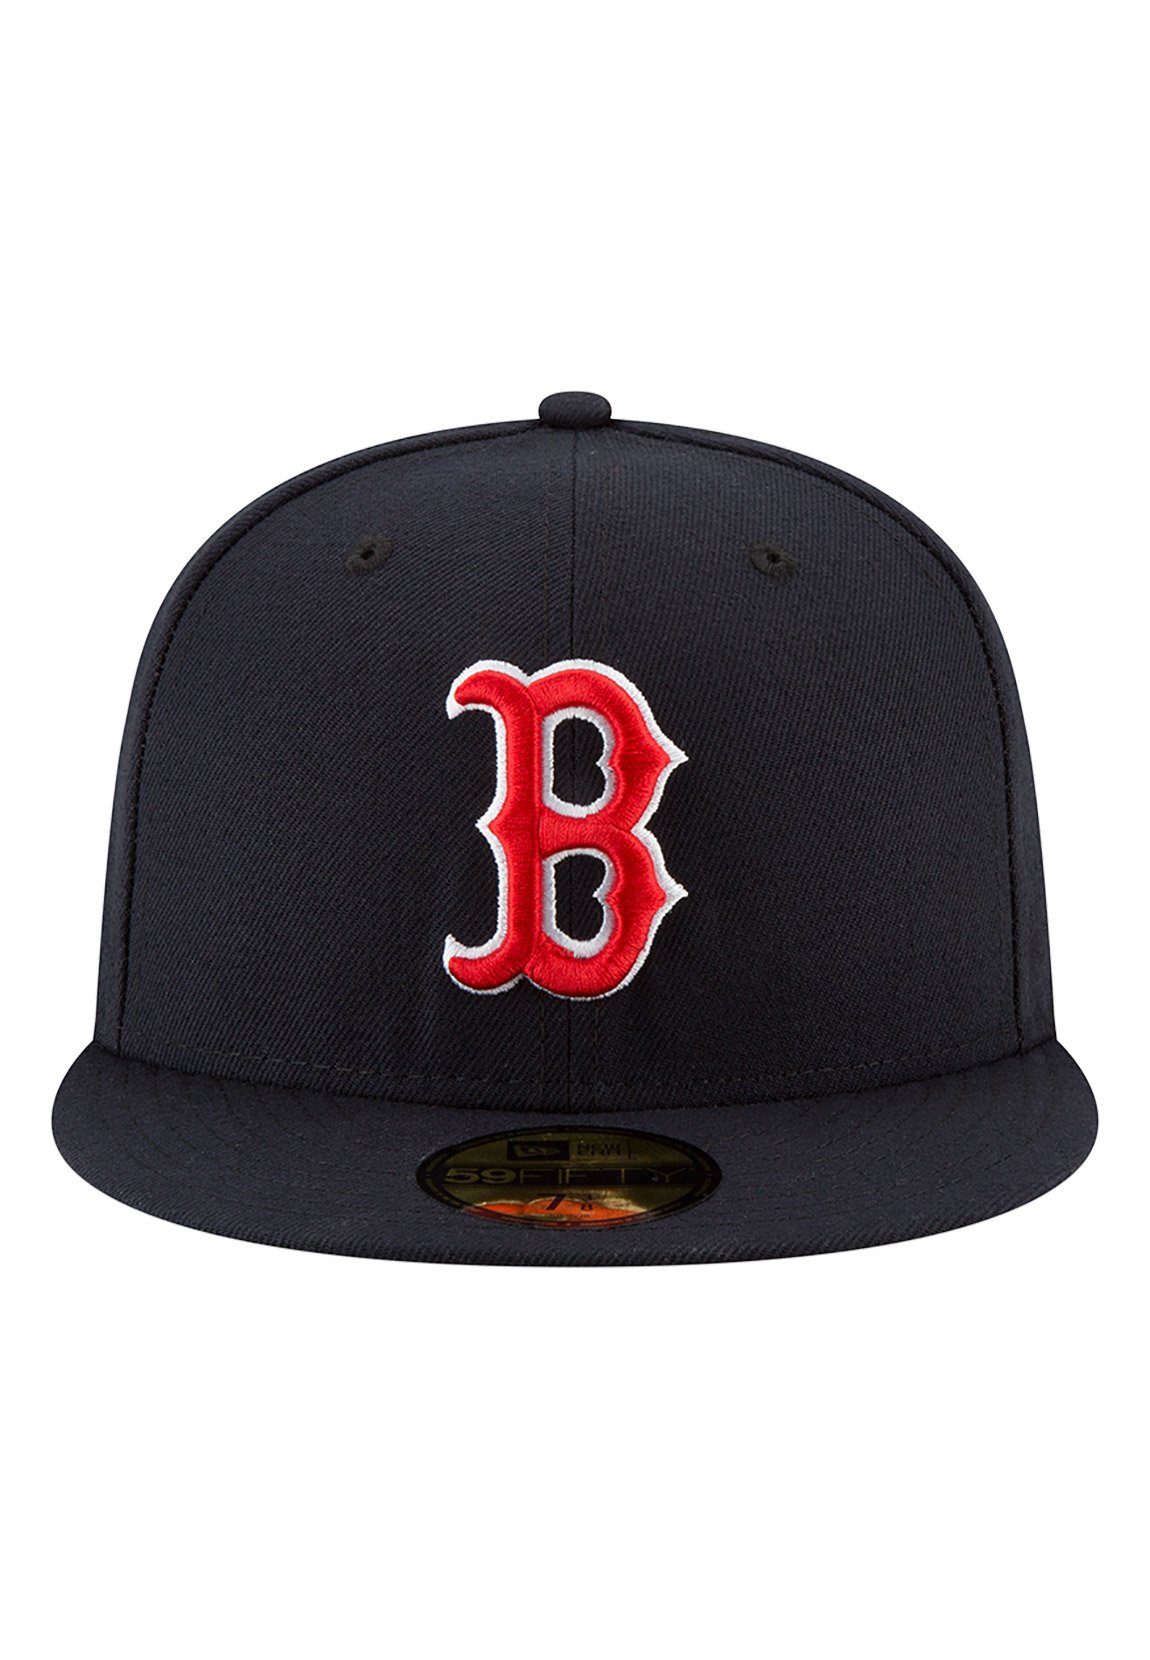 New Dunkelblau SOX BOSTON Authentics RED Cap Era Cap New Fitted Era Fitted 59Fifty Rot